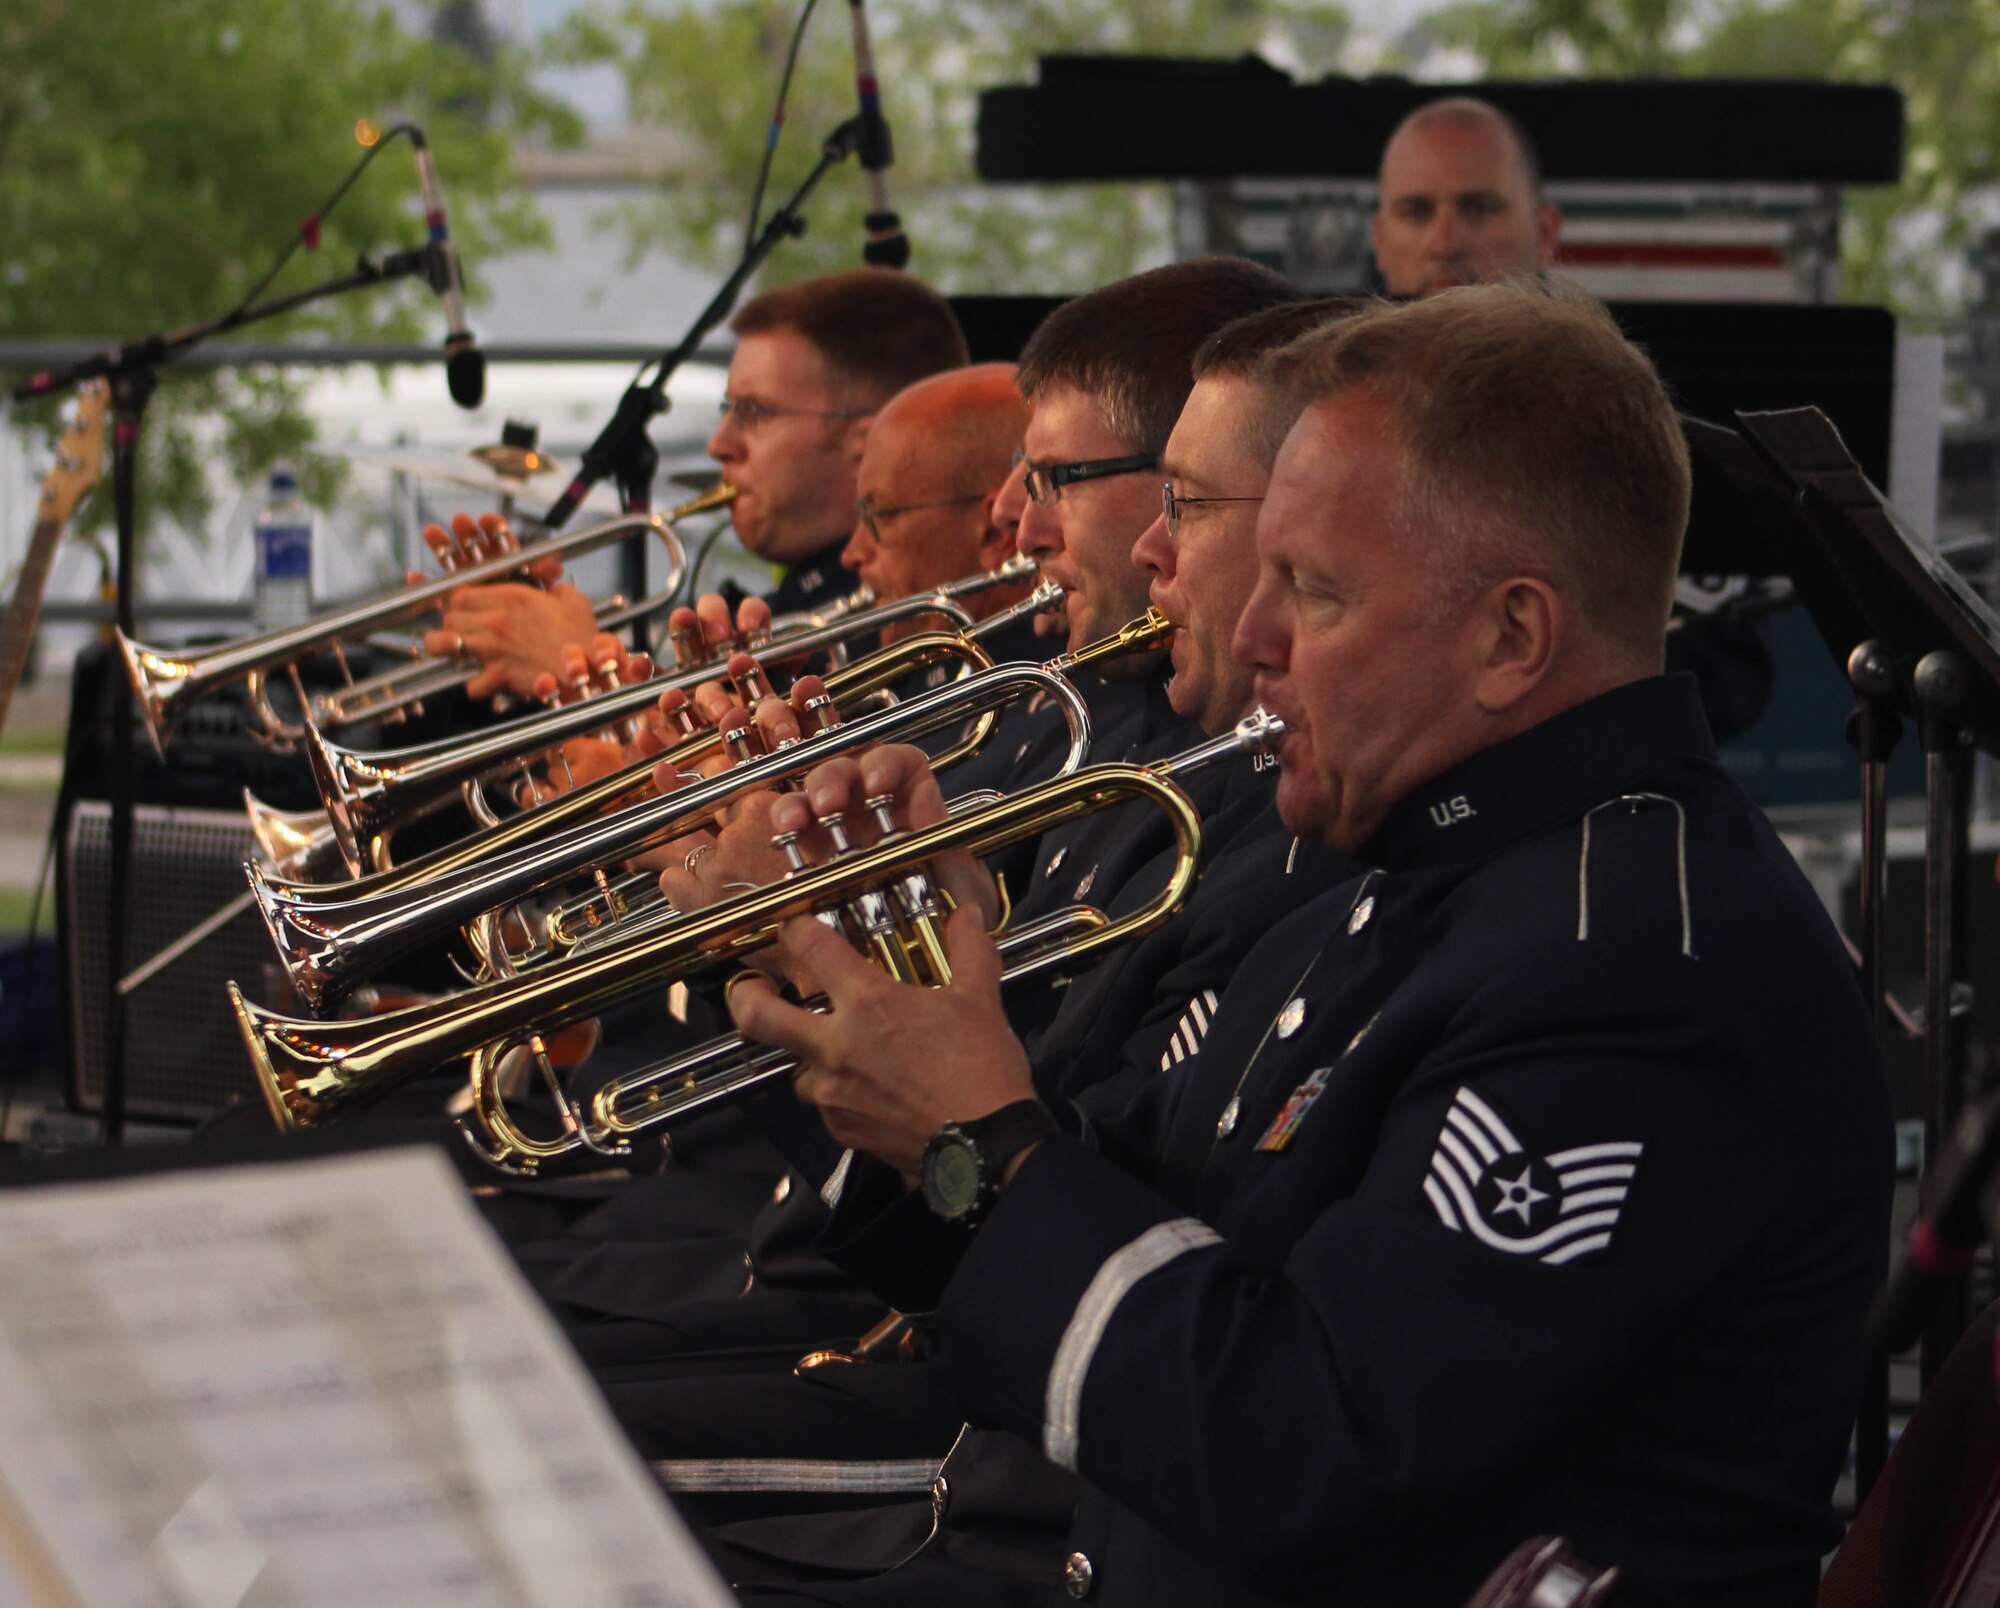 Instrumentalists with the Air National Guard Band of the Midwest perform for audiences during annual training at the Bayfront Festival Park, Duluth, Minn., July 4, 2014. They performed jazz, rock and concert music for audiences in Illinois and Wisconsin as part of their community relations tour before a grand finale in Minnesota July 4. The annual concert series was the result of a year’s worth of training and practice, one that the band used to celebrate patriotism with communities across the Midwest. (Courtesy photo/Released)